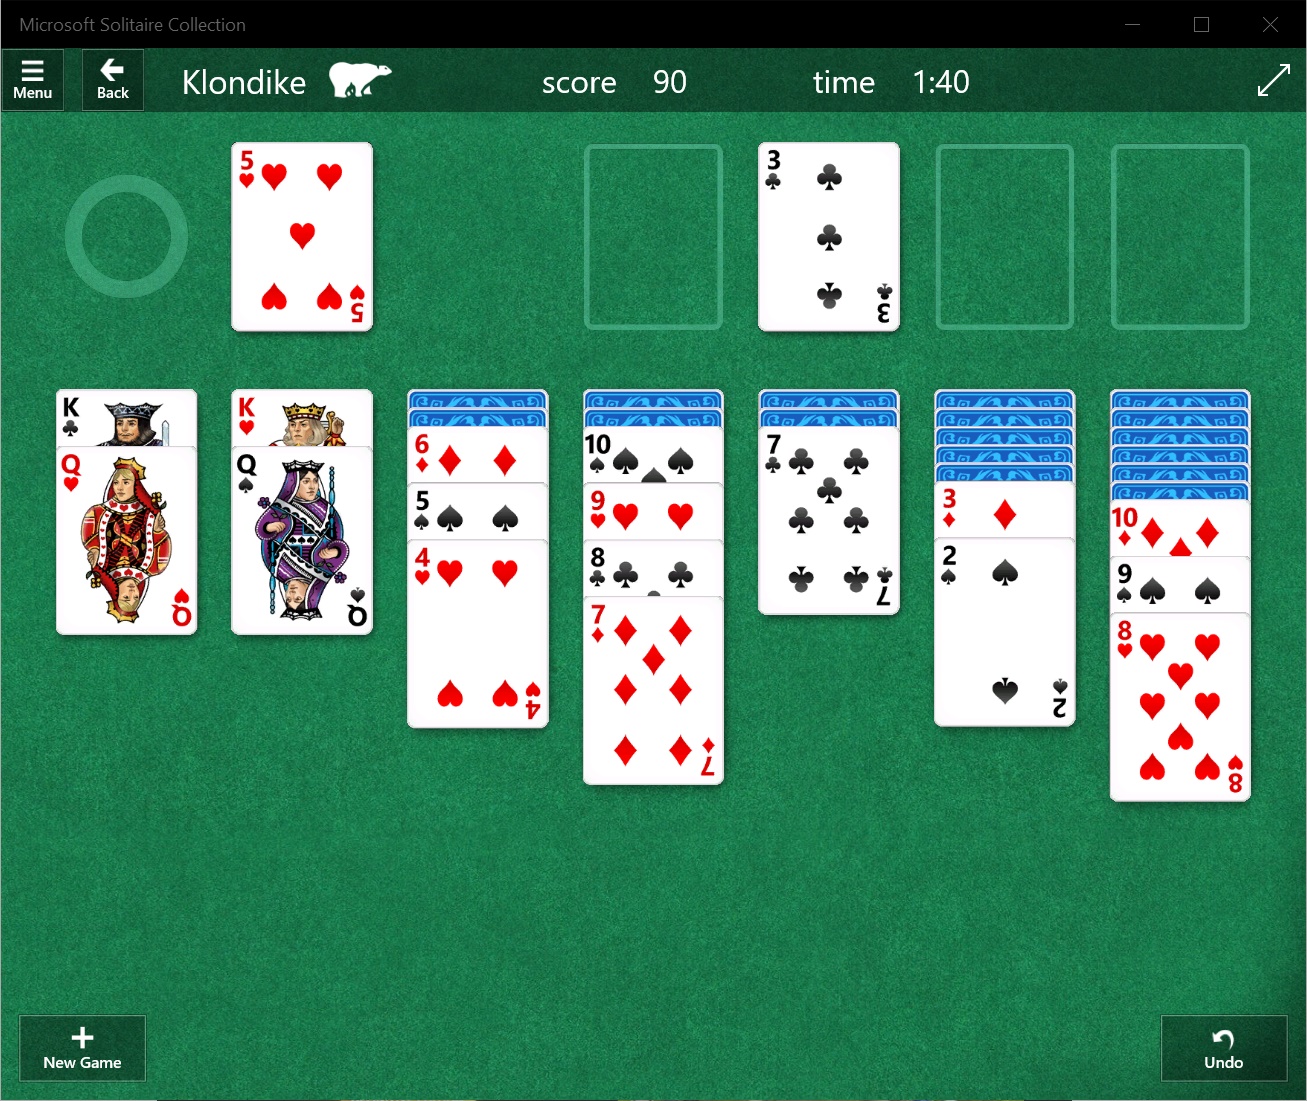 microsoft solitaire collection rules